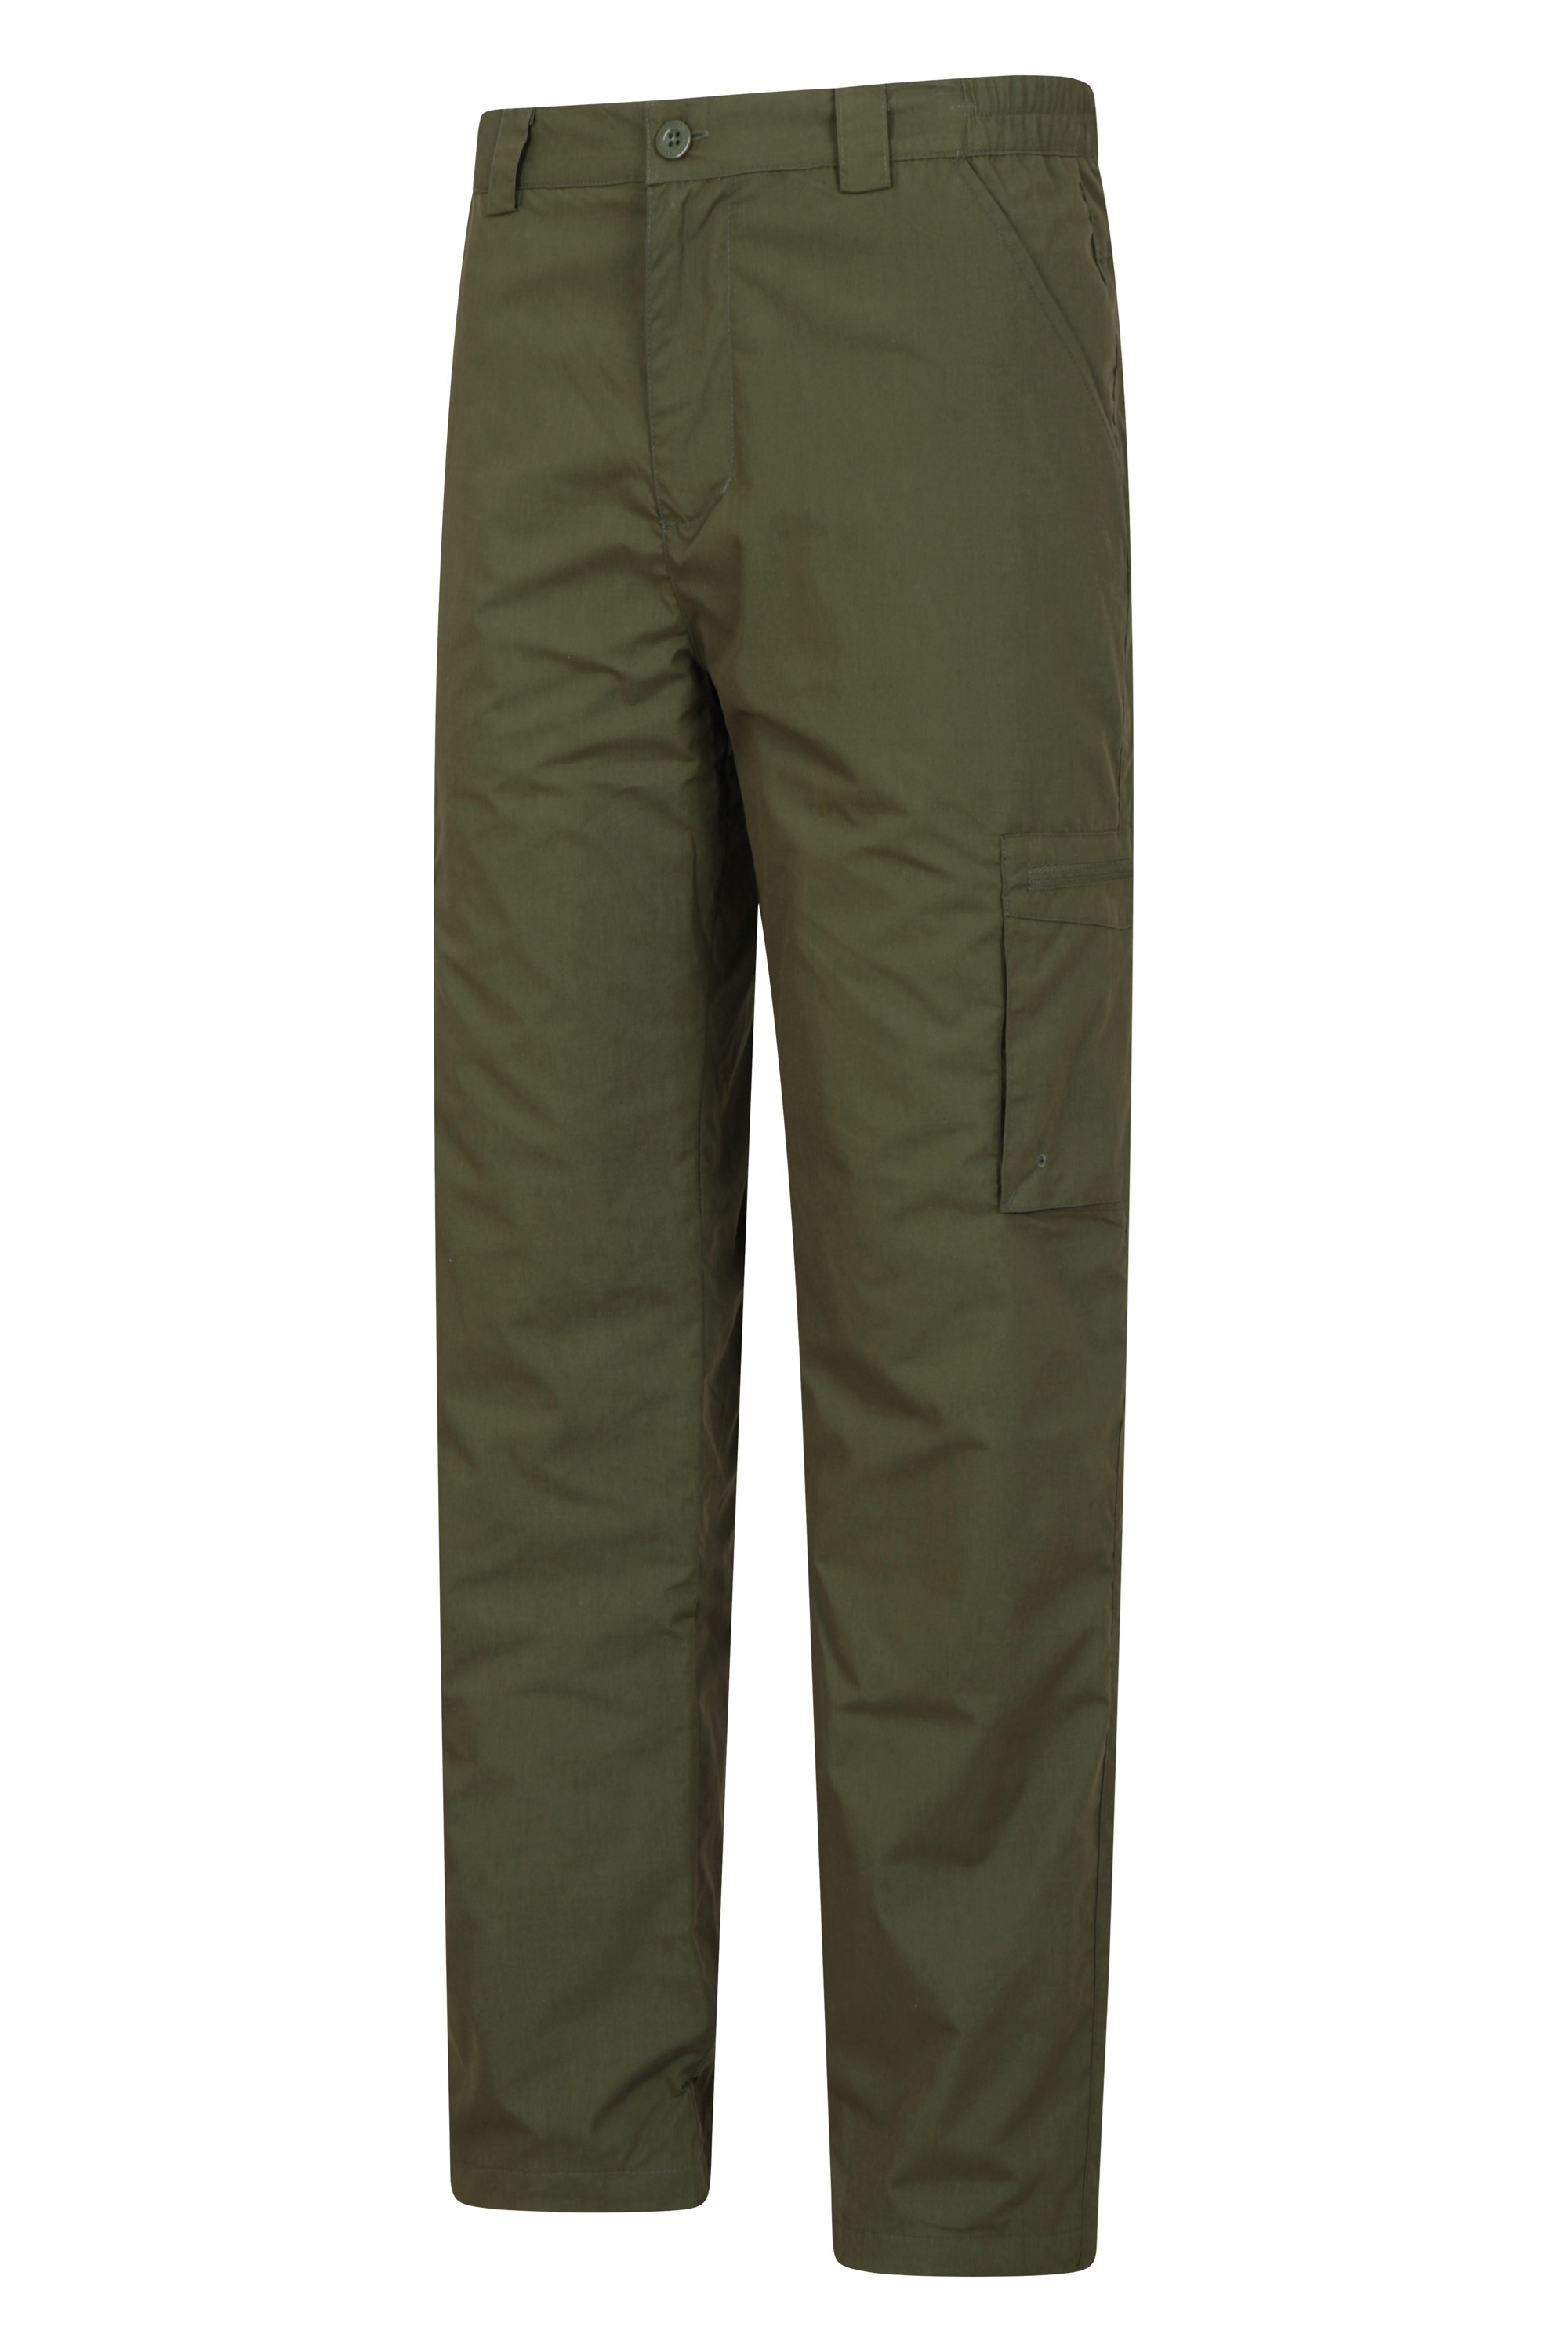 Thermal Skinny Outdoor Trousers Forest Green Fleece Lined